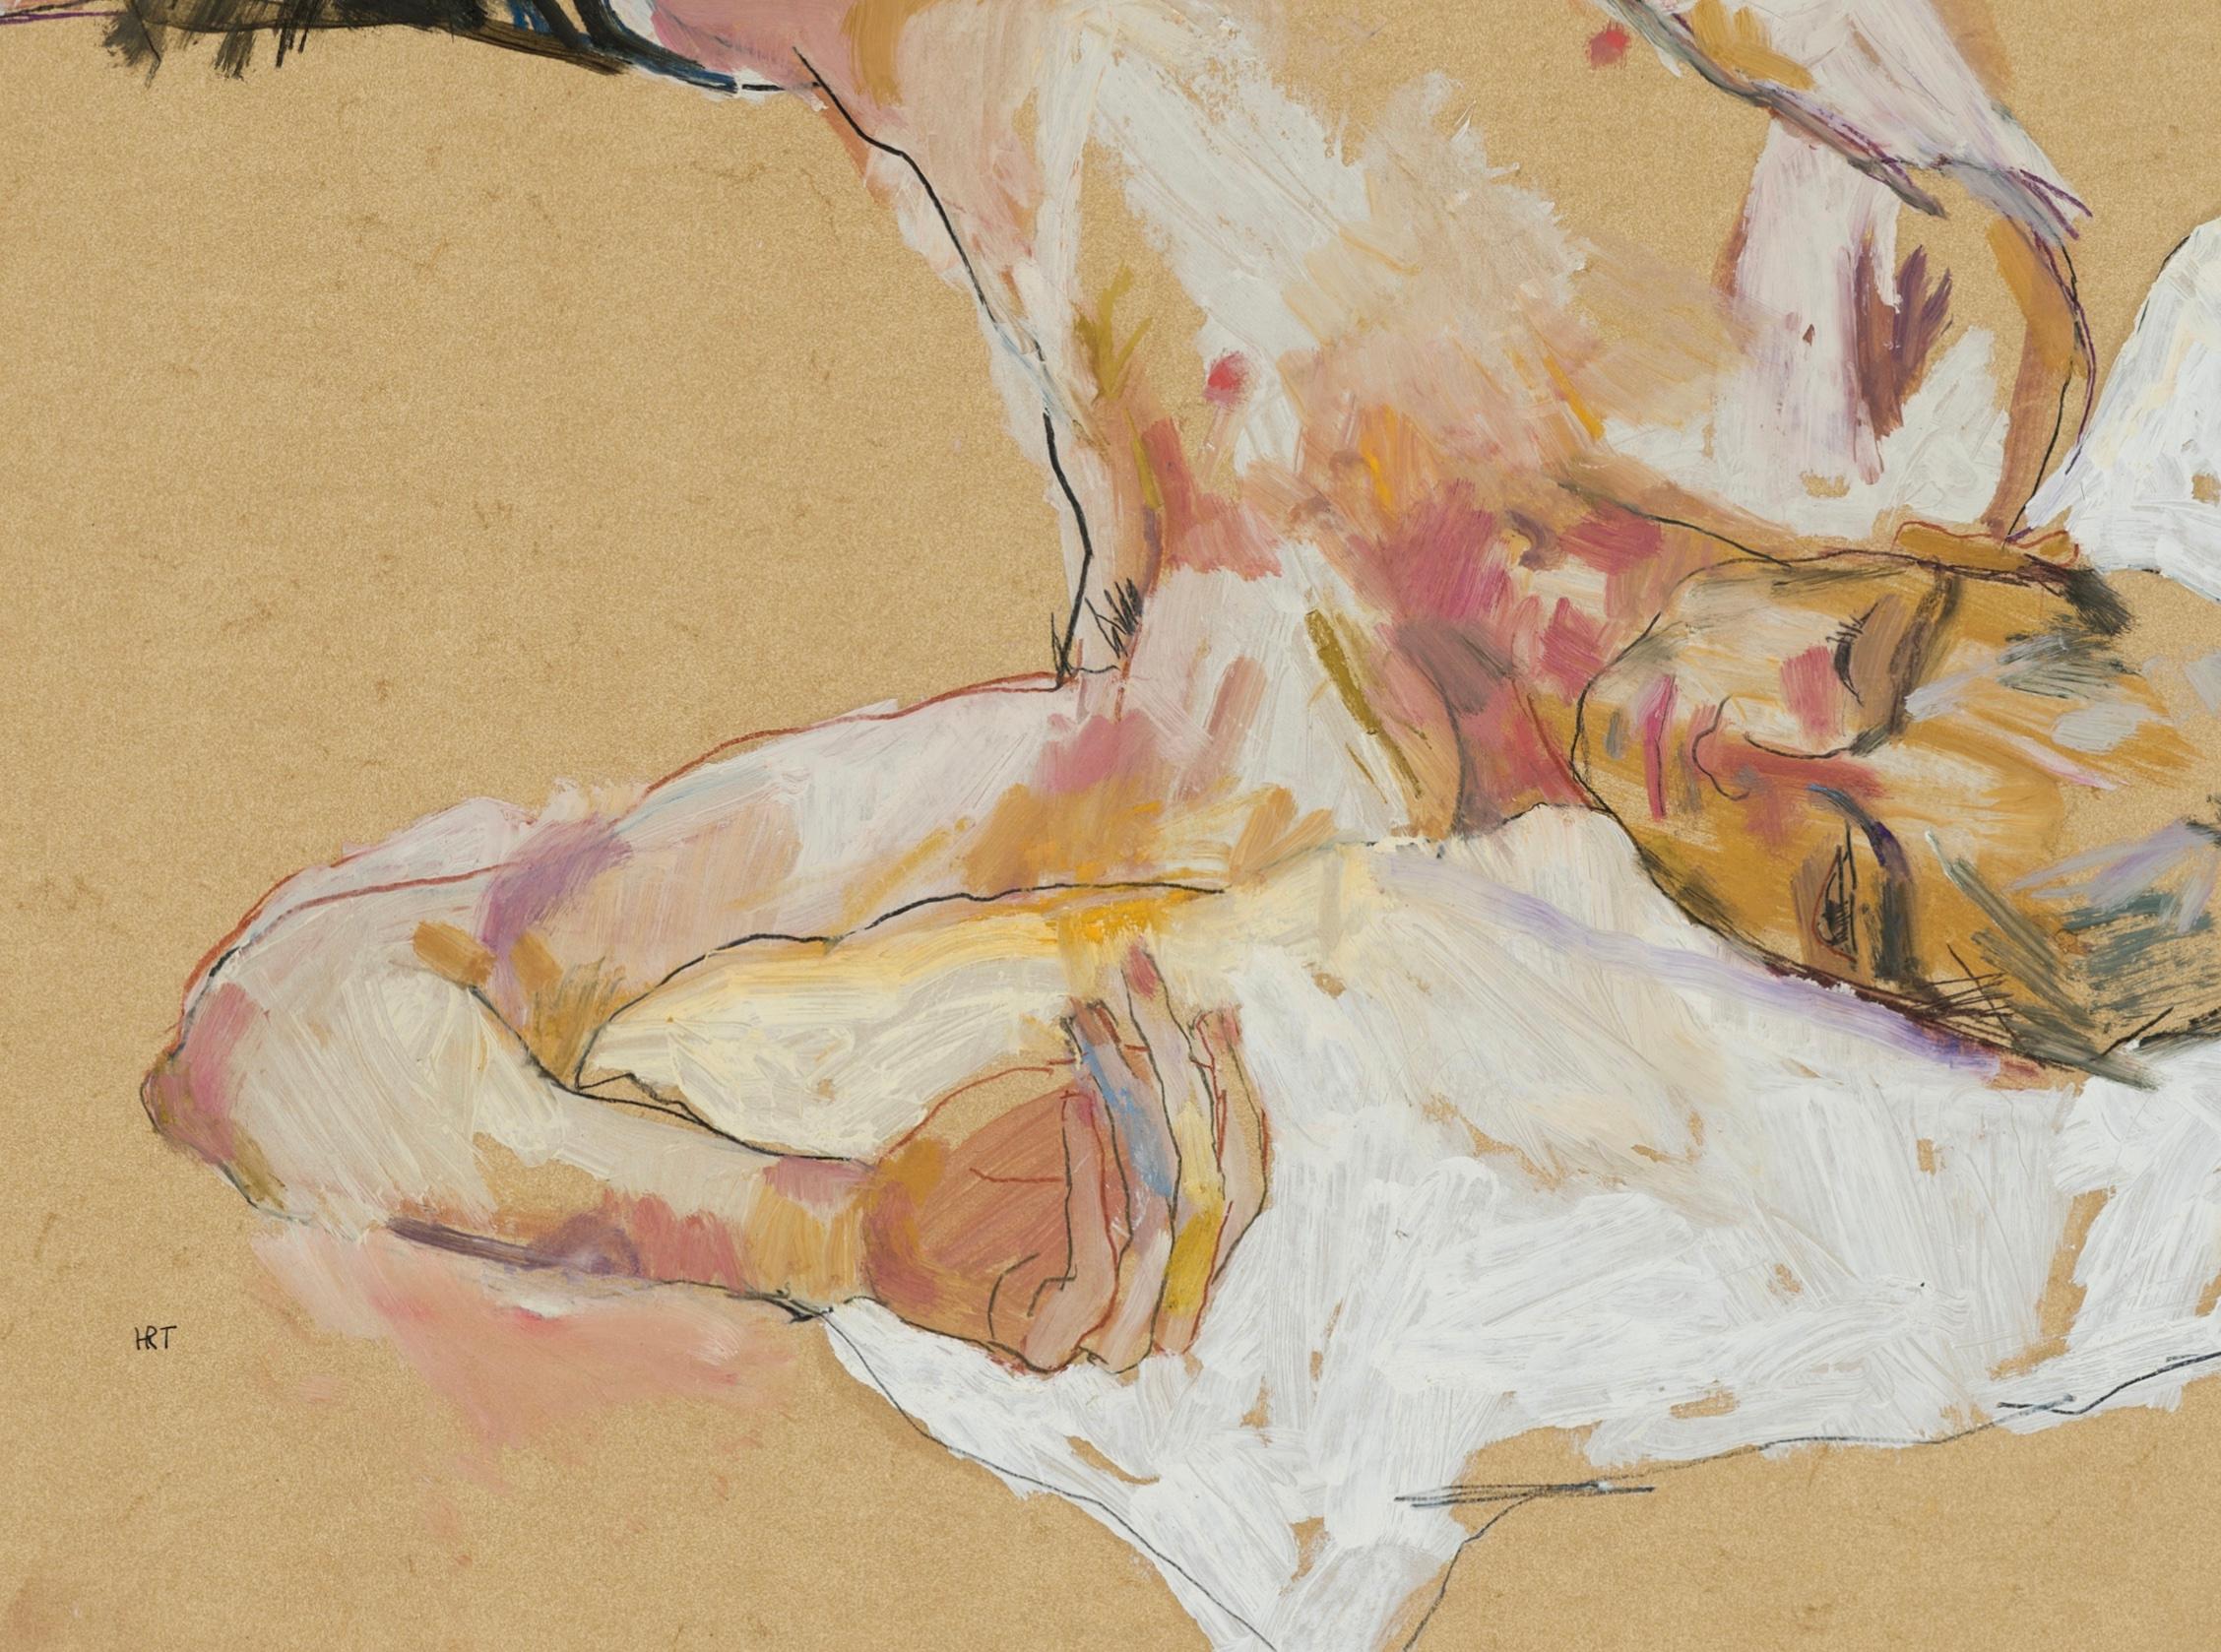 Andrew (Lying on White Pillow - Black Shorts), Mixed media on ochre parchment For Sale 1